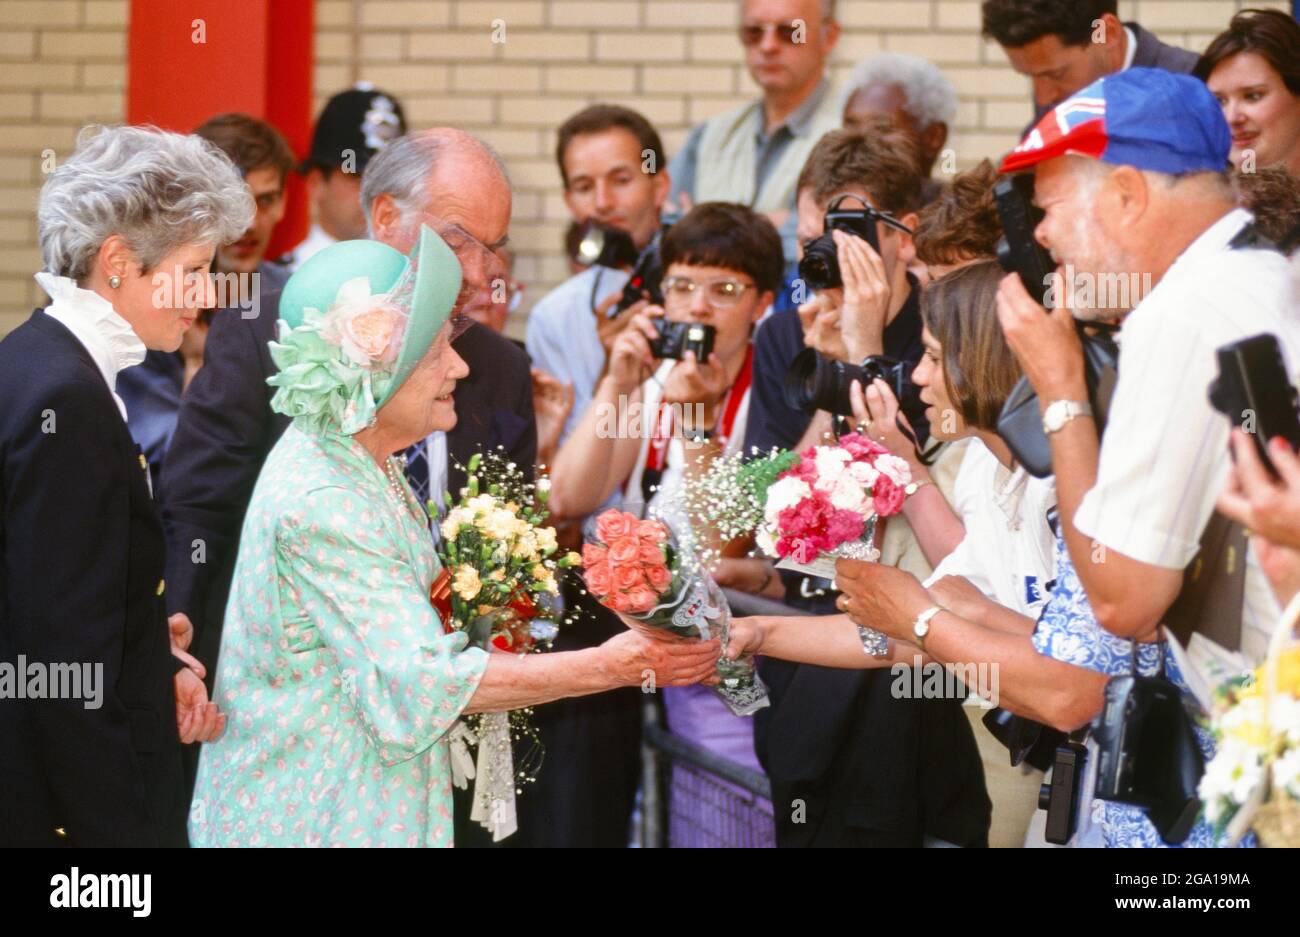 Queen Elizabeth The Queen Mother receives bouquets from royal well wishers. 150th Anniversary of St Mary's Hospital, Paddington, London. UK 27.06.1995 Stock Photo